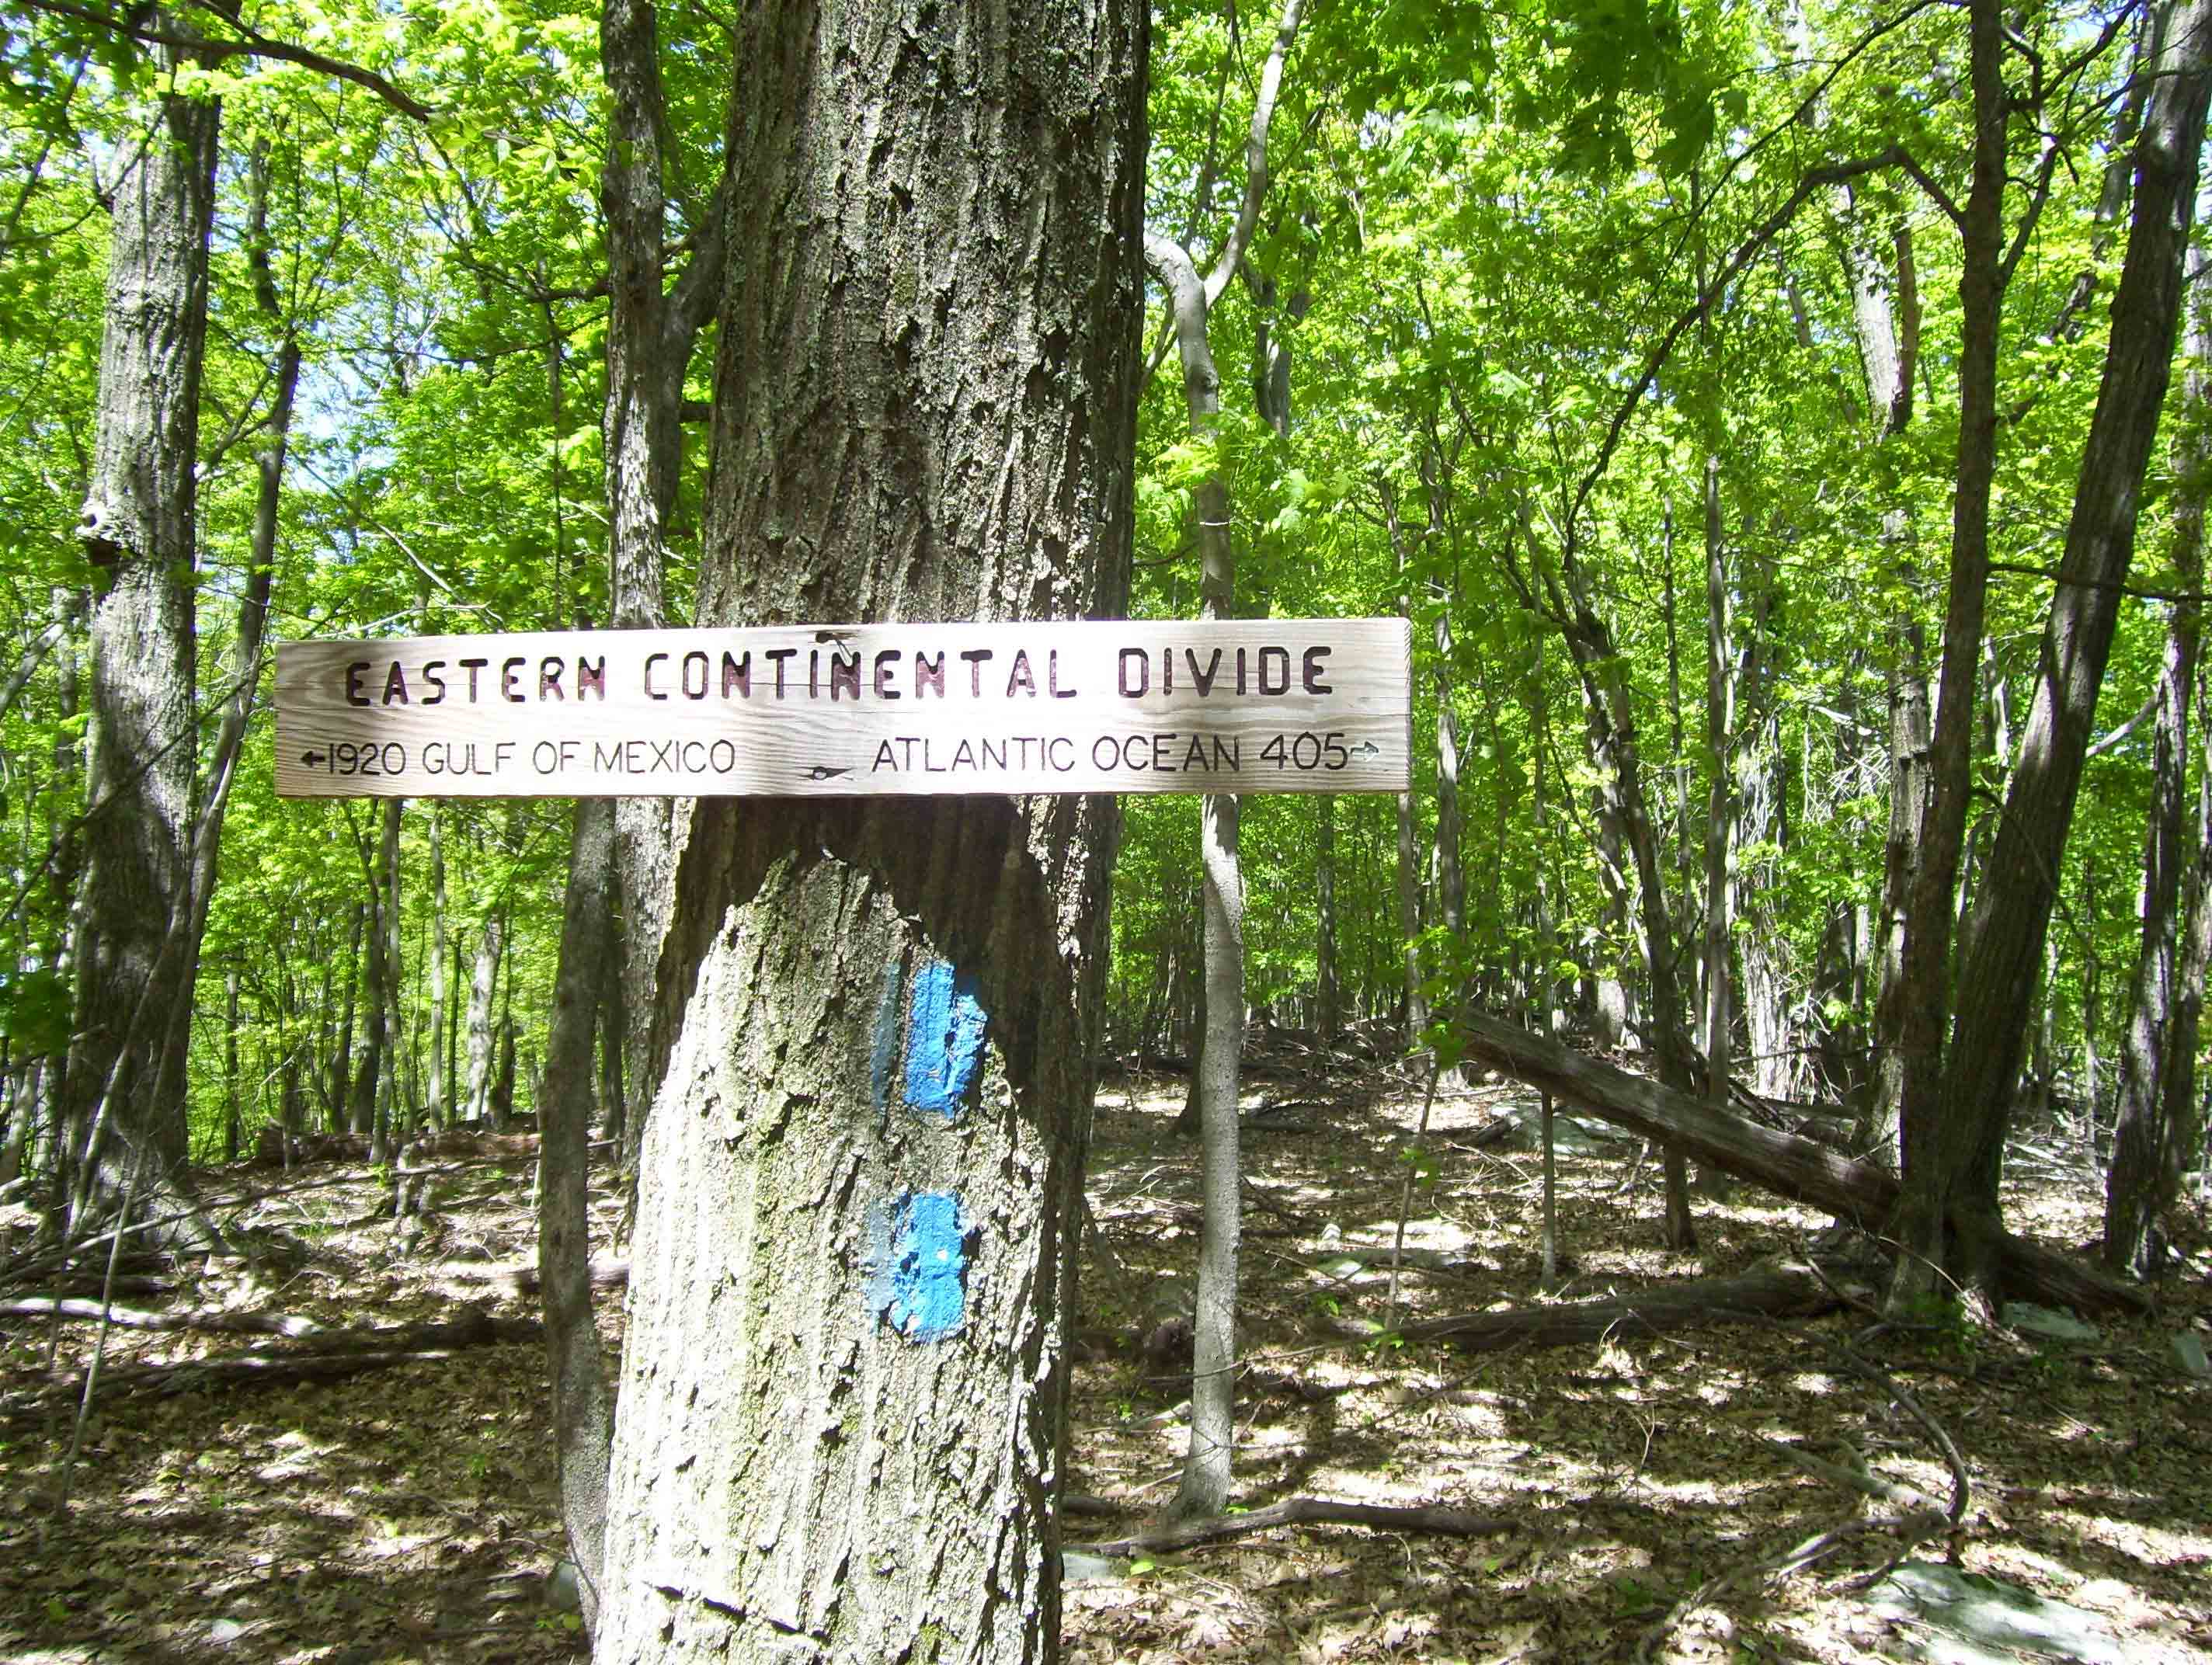 mm 3.7 Eastern Continental Divide Sign at crest of Sinking Creek Mt.  Courtesy dlcul@conncoll.edu